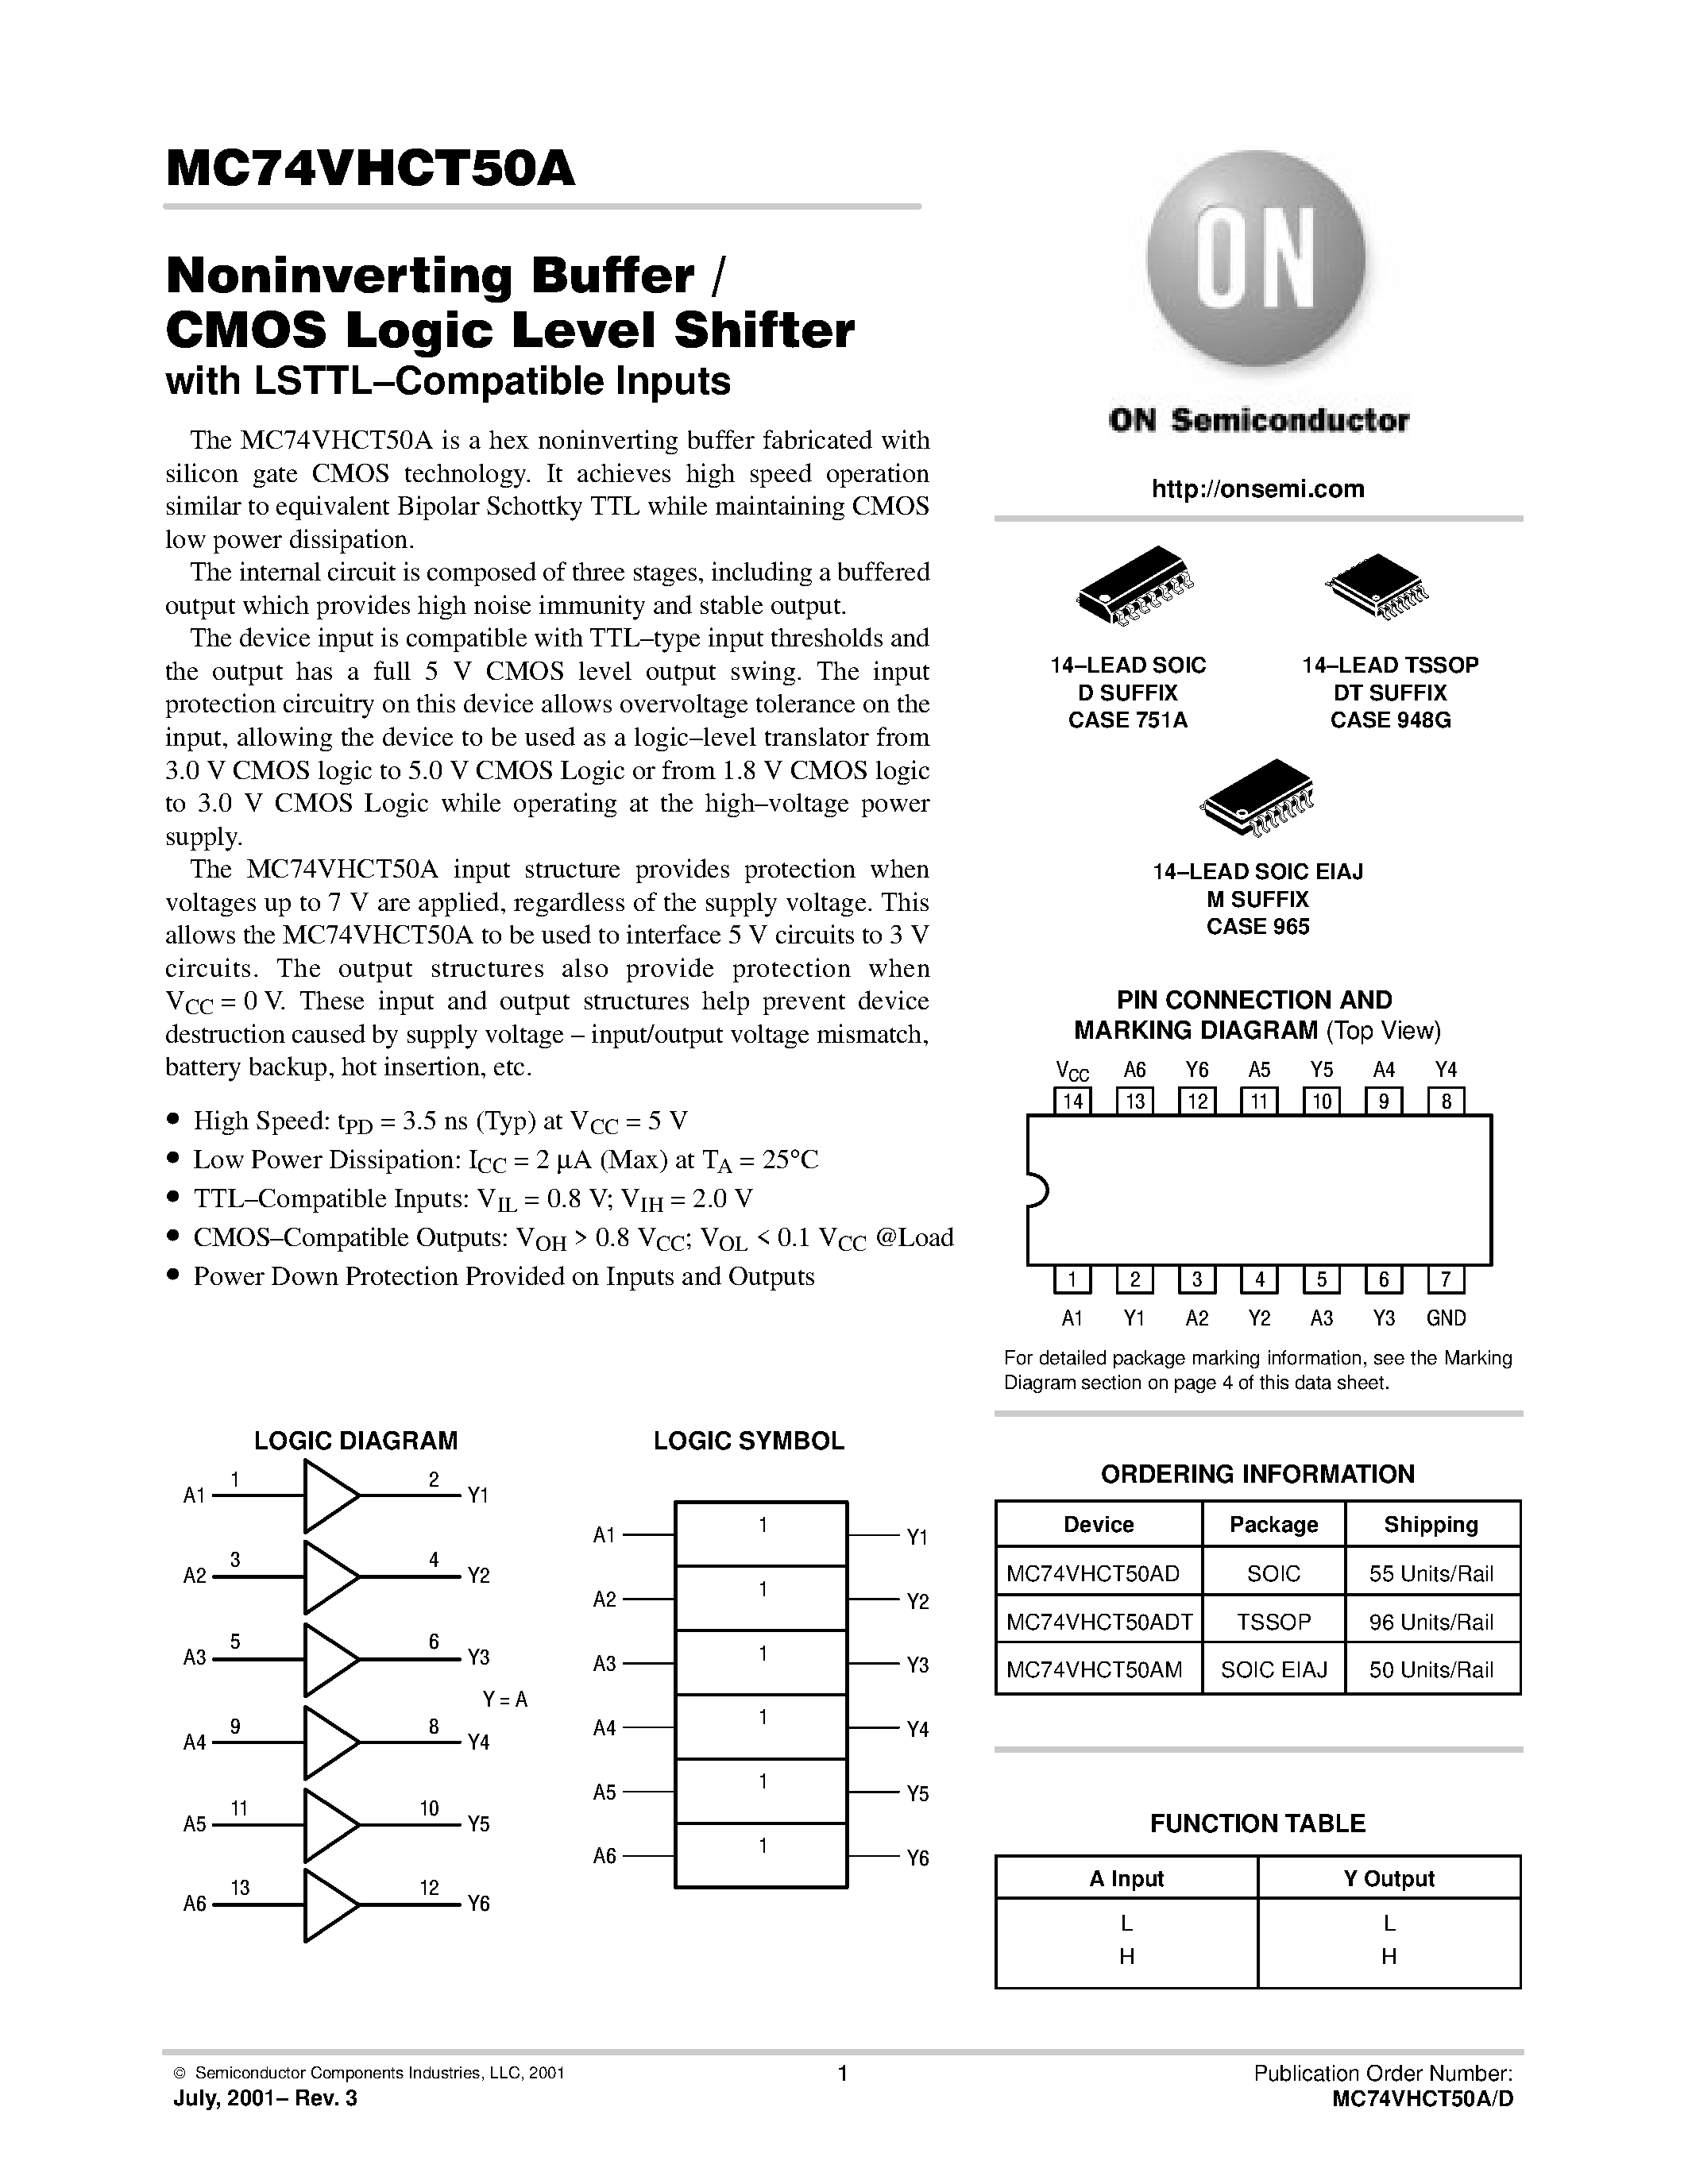 Datasheet MC74VHCT50A - Noninverting Buffer / CMOS Logic Level Shifter with LSTTL-Compatible Inputs page 1